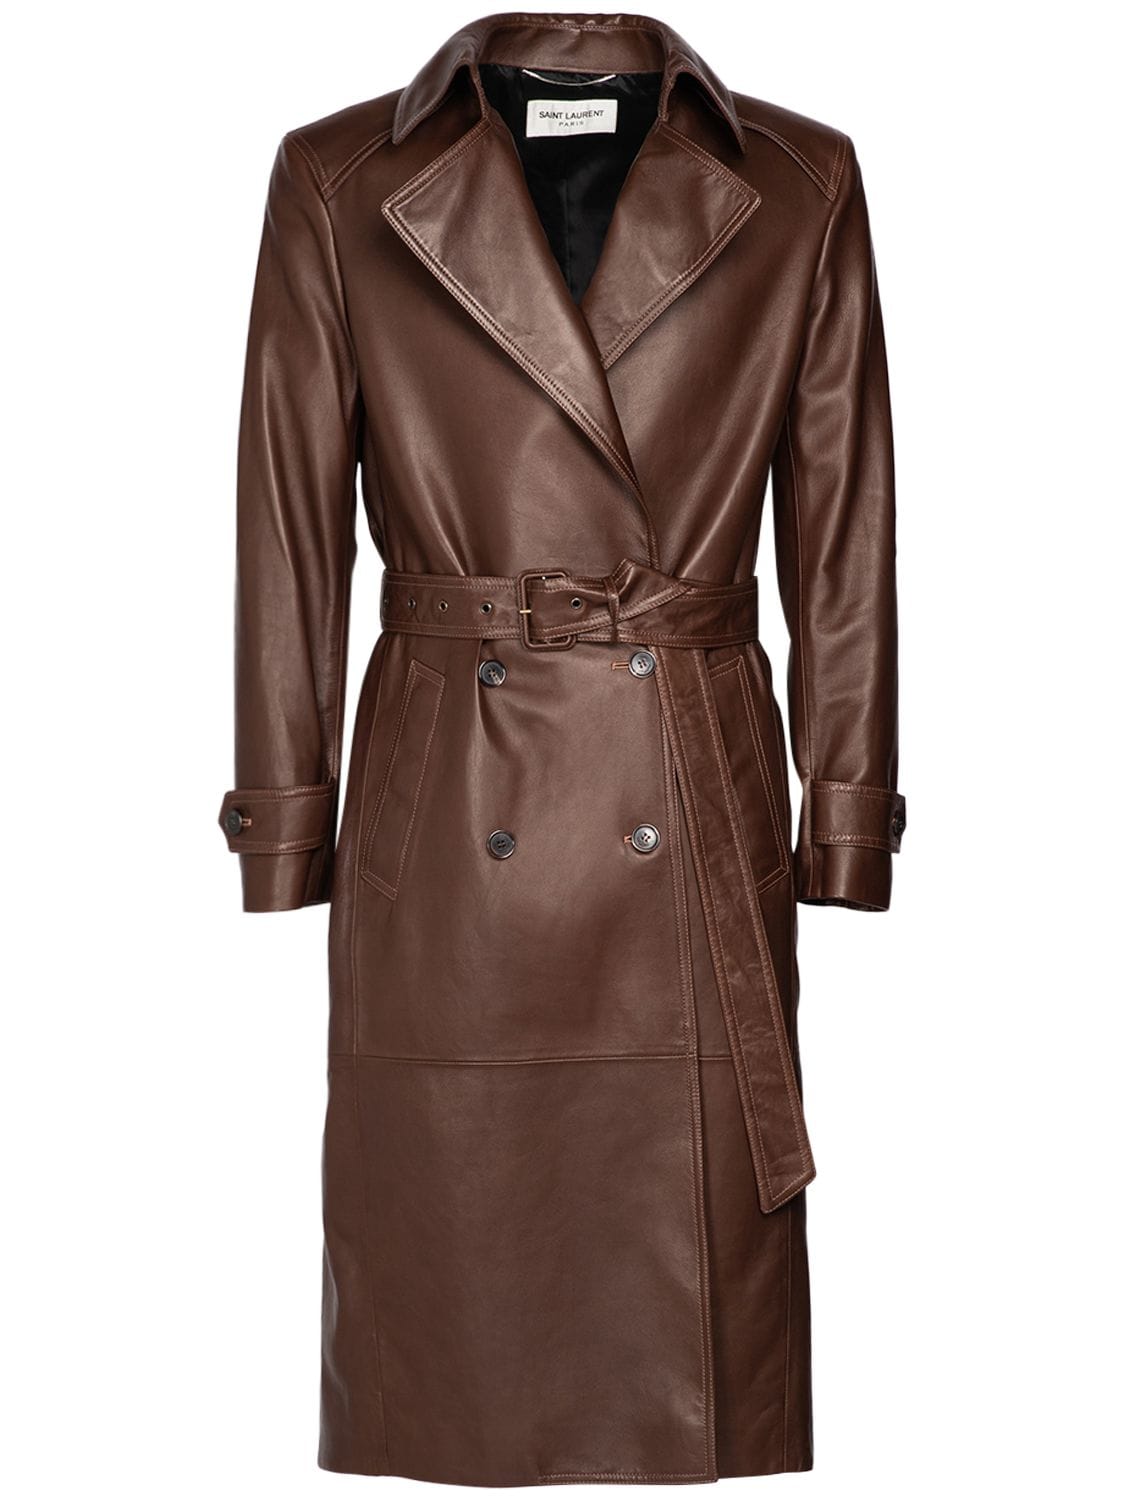 Leather Trench Coat | The Hoxton Trend